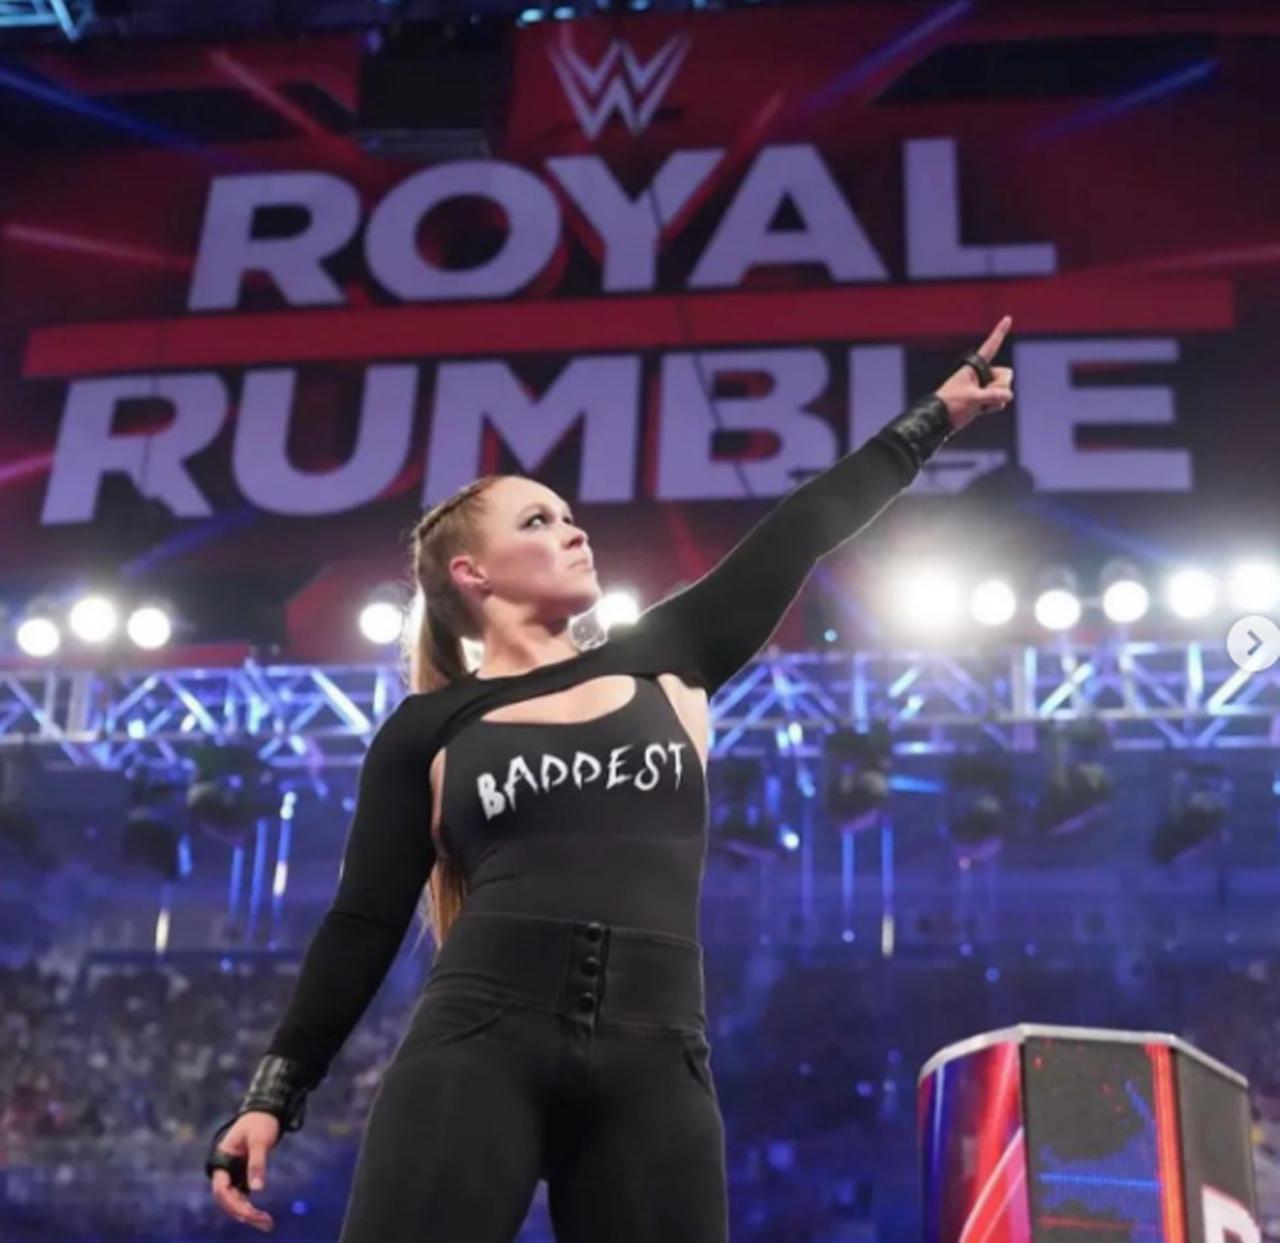 Ronda Rousey was last seen at WWE WrestleMania 35, in April 2019, after losing the Raw women's championship to Becky Lynch. She made her much-awaited comeback to WWE at the 2022 Royal Rumble and won the women's Royal Rumble, eliminating Charlotte Flair and will now headline WrestleMania 38.